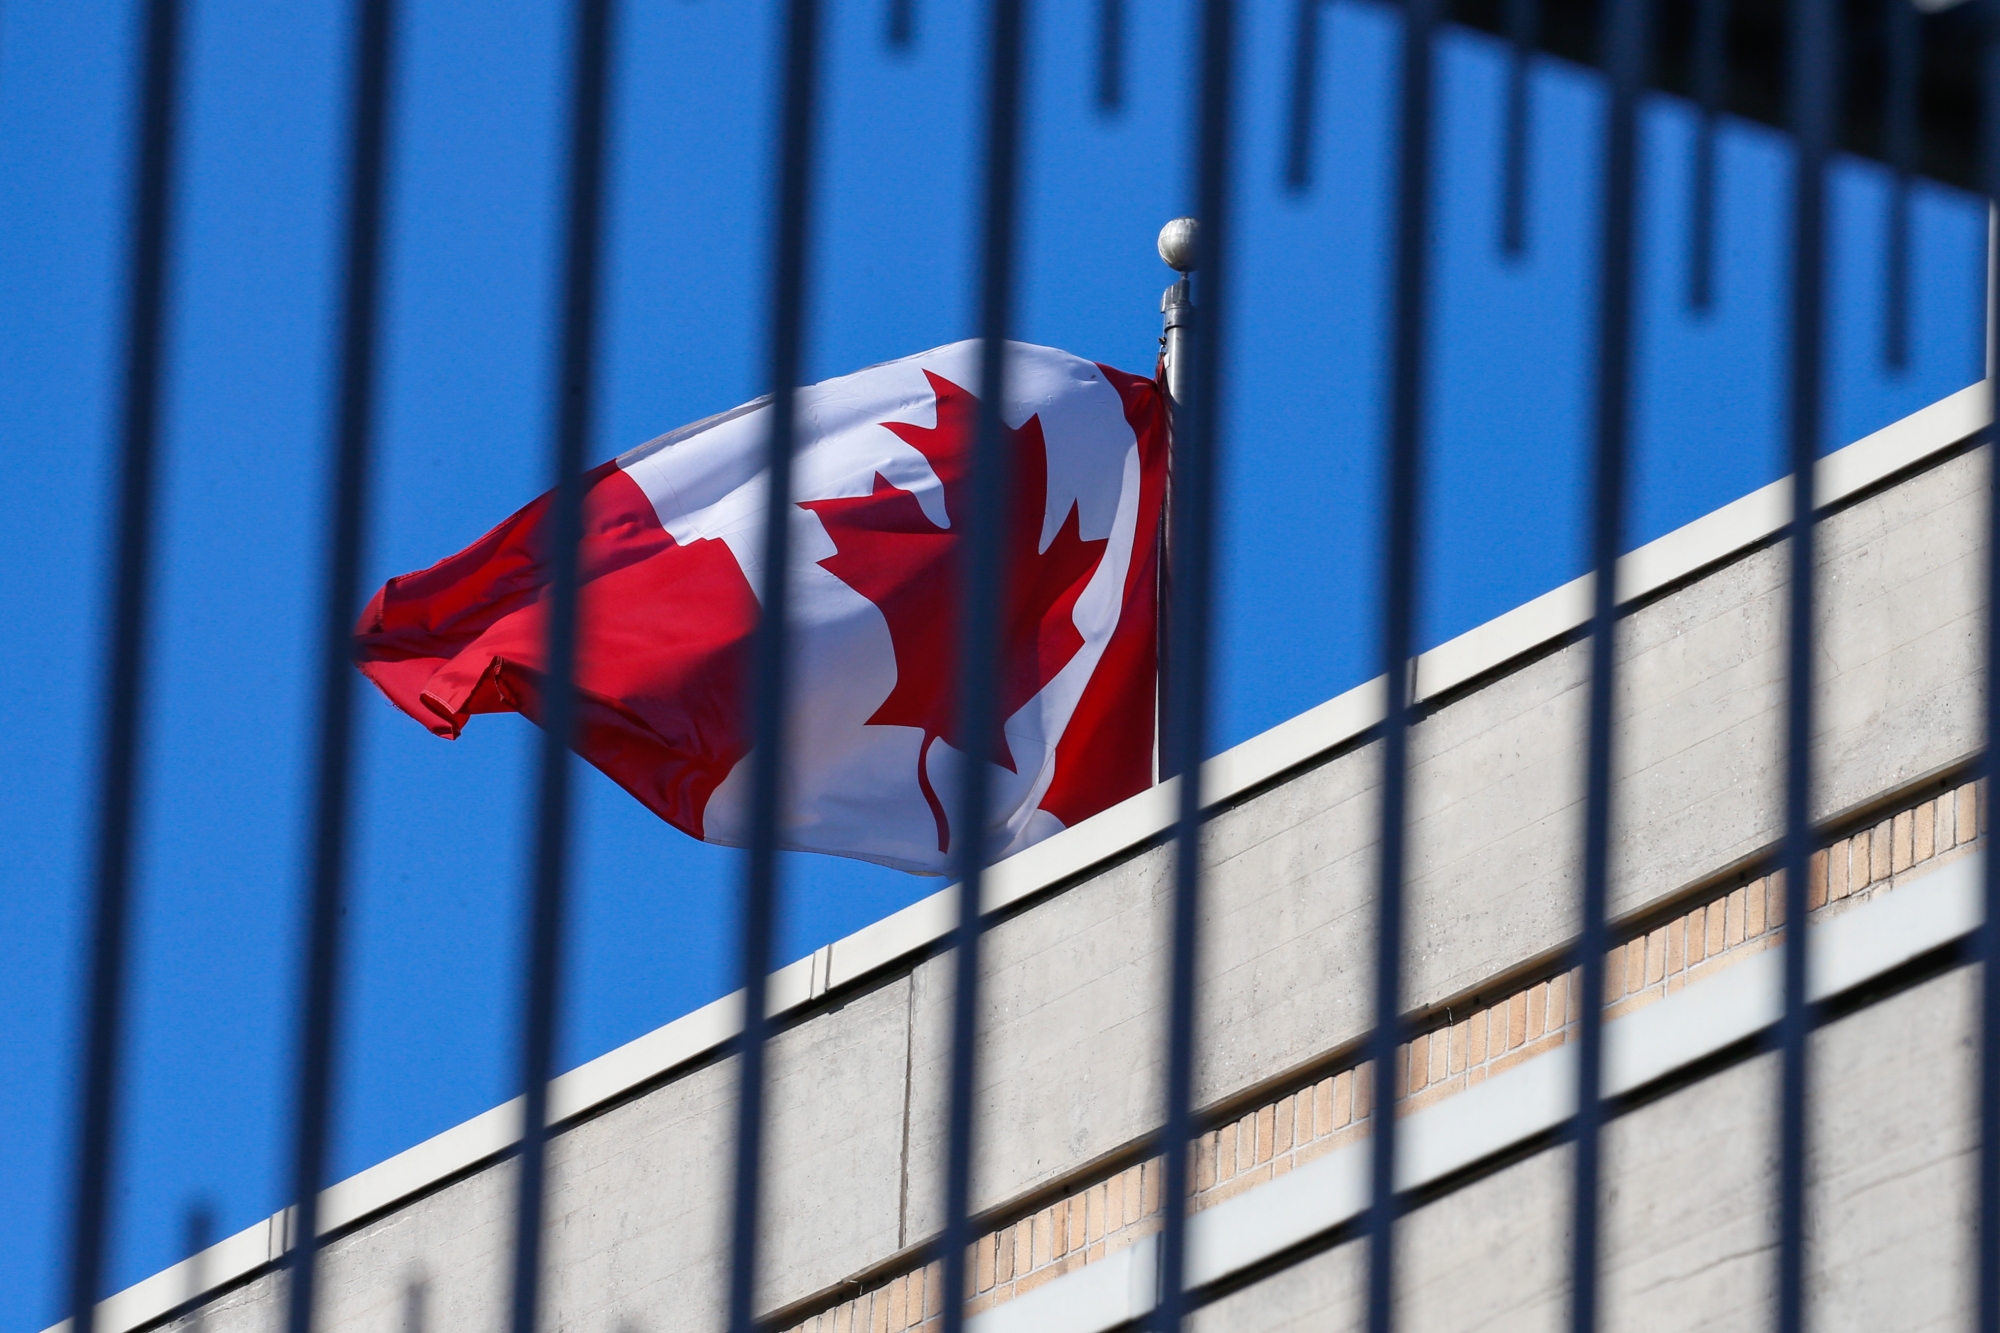 epa09407775 (FILE) - A Canadian flag flies at the Canadian embassy in Beijing, China, 15 January 2019 (reissued 10 August 2021). On 10 August 2021, A Chinese court upheald the death sentence for Robert Lloyd Schellenberg, a Canadian man who was accused of smuggling drugs in China in 2014. EPA/ROMAN PILIPEY